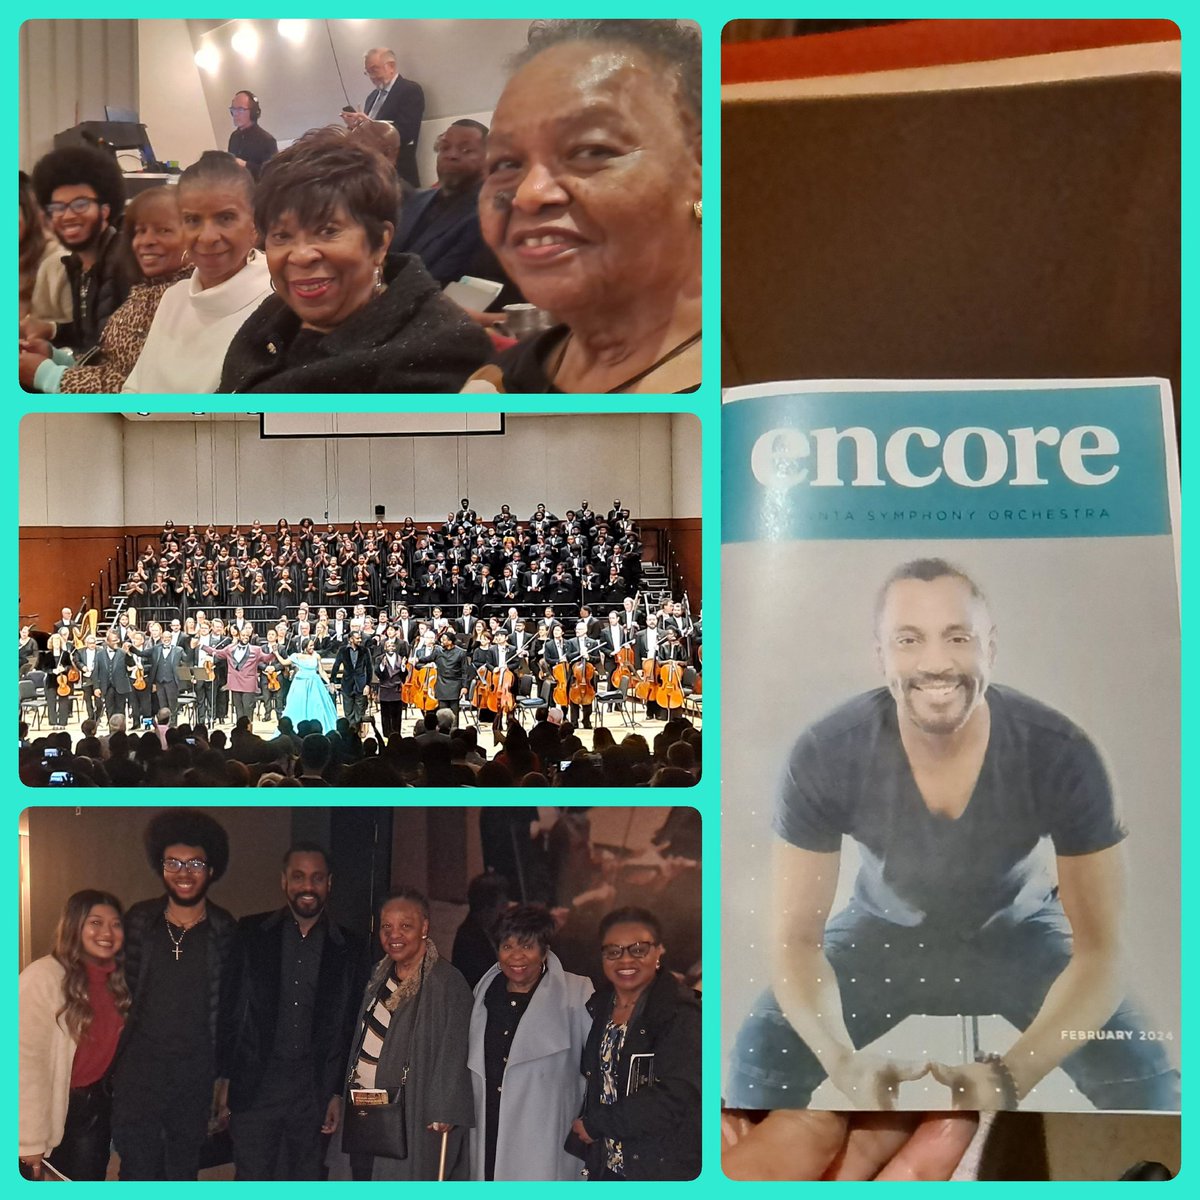 About last night!! Bravo to composer Dr Carlos Simon!! What a magnificent and brilliant presentation! @AtlantaSymphony with Spelman College and Morehouse College! #BHM2024, #STEAM